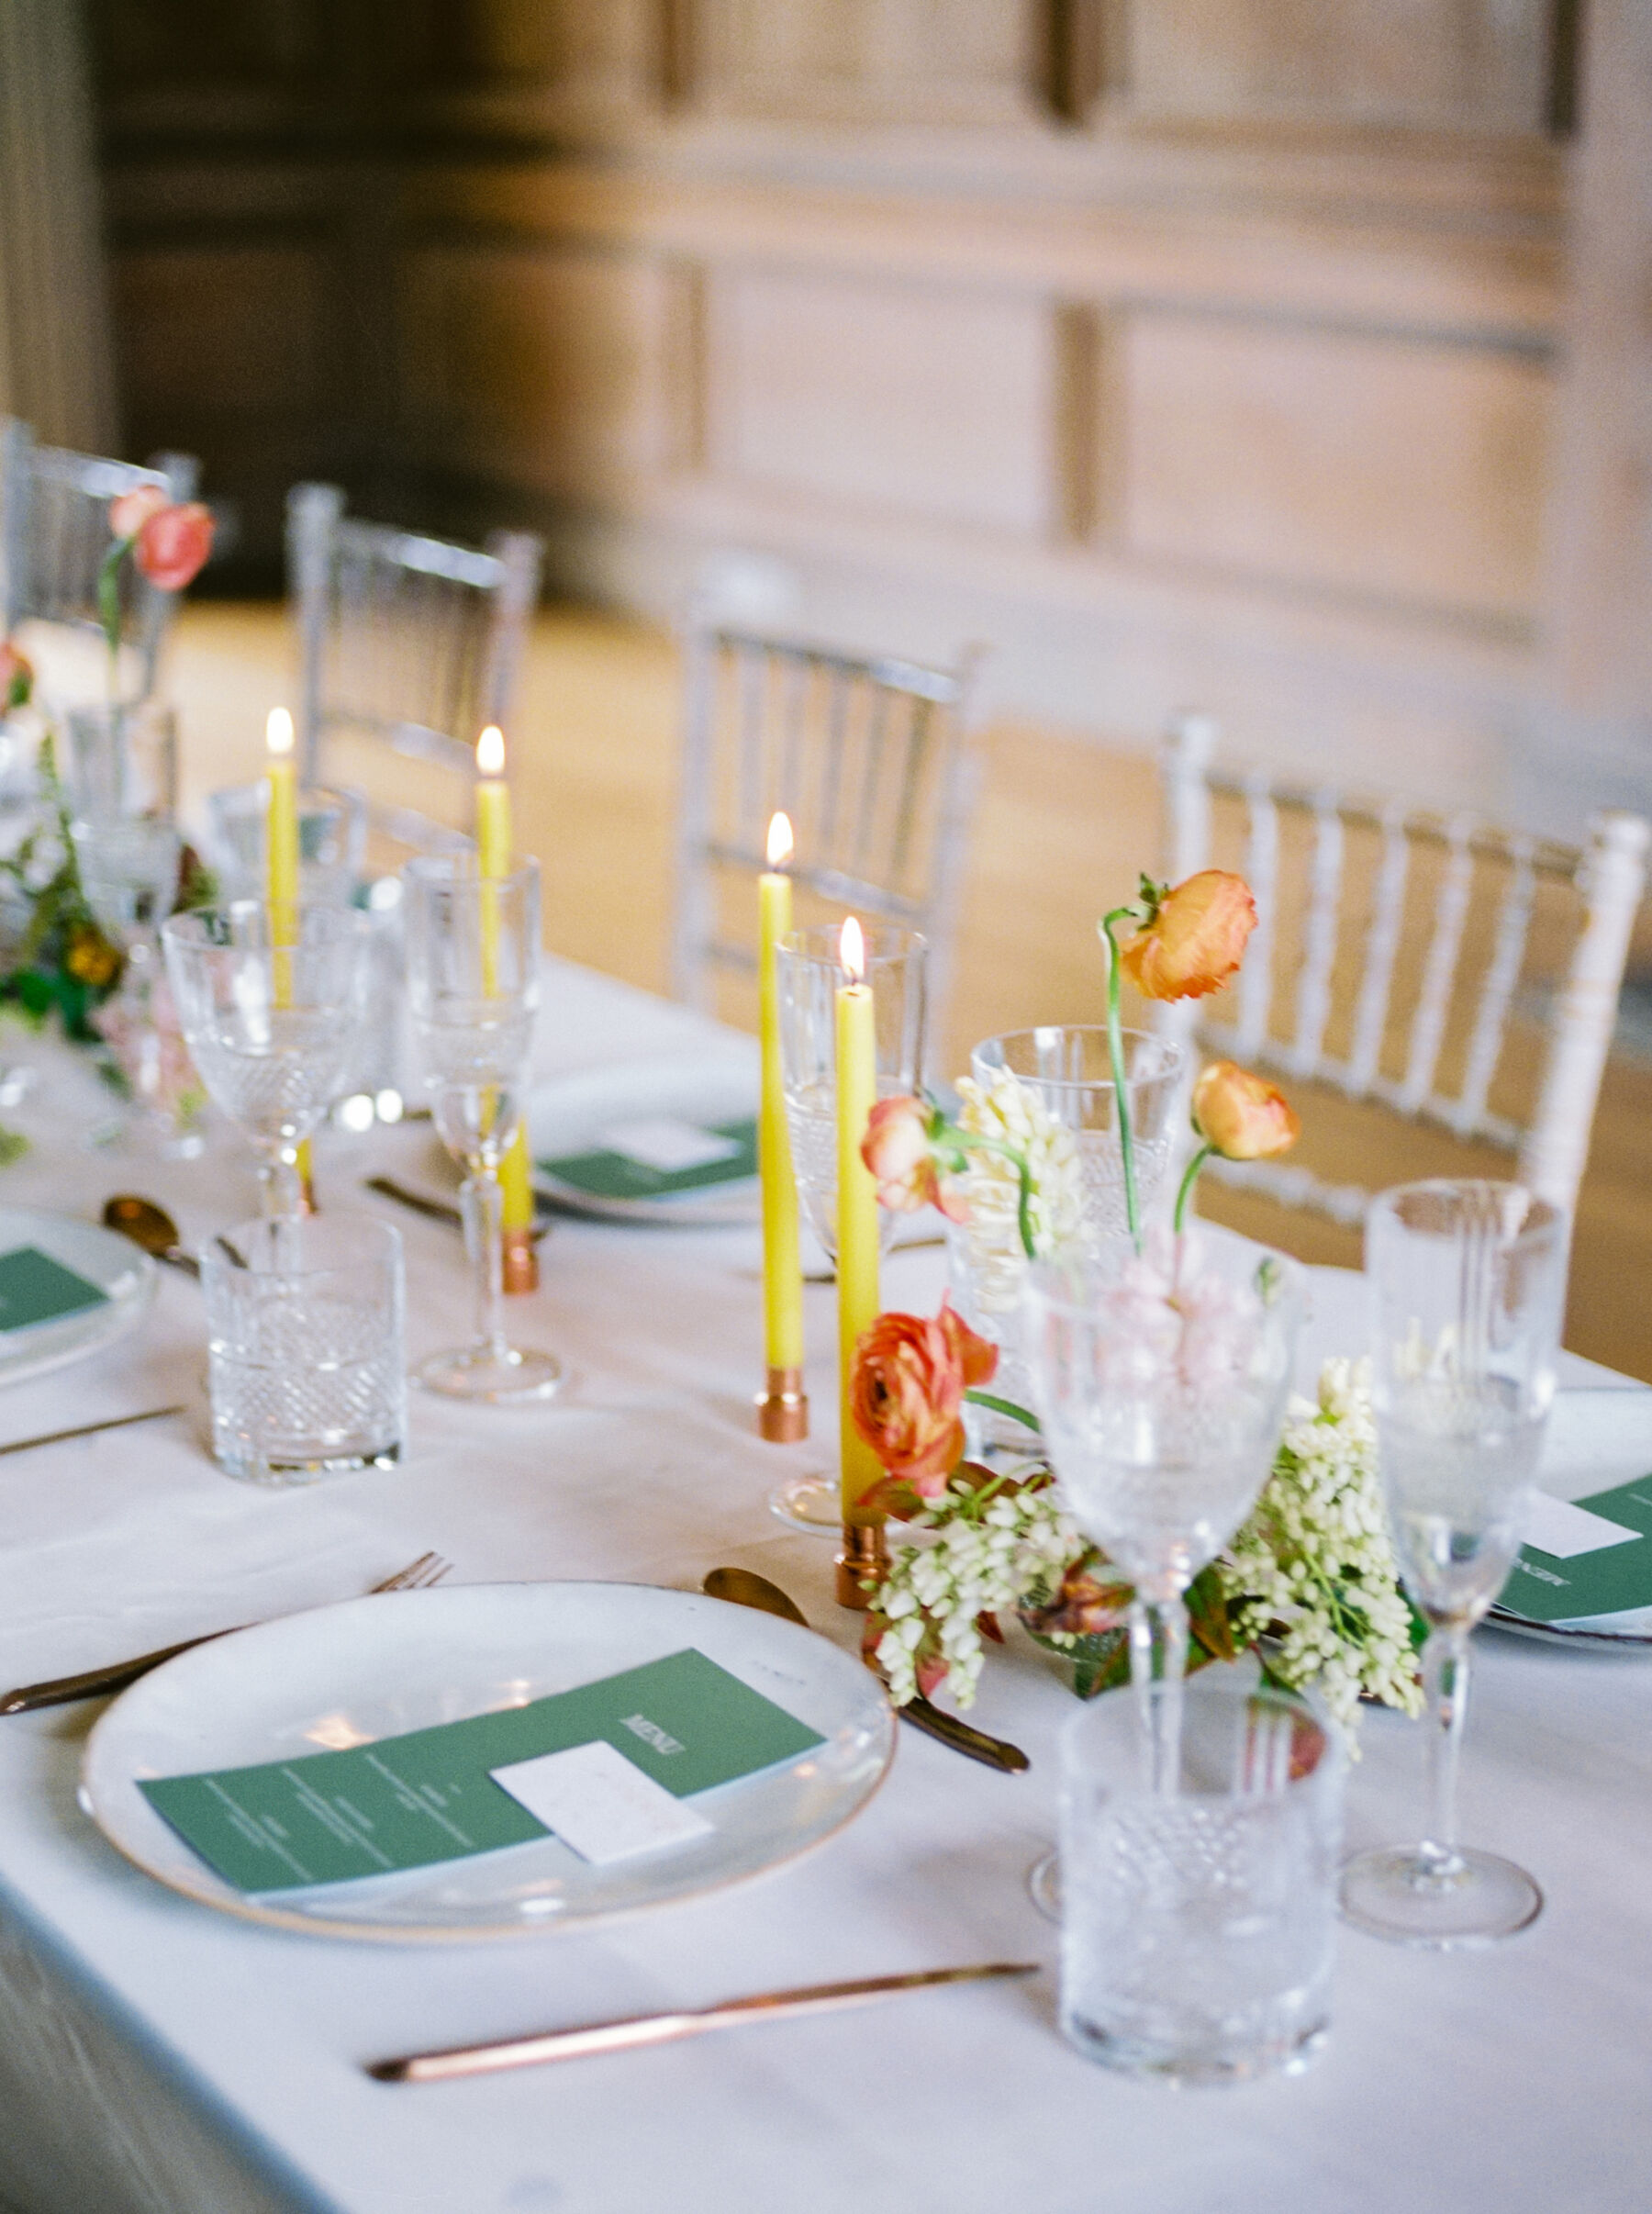 Chatreuse tapered candles on a table with elegant British grown wedding flowers.